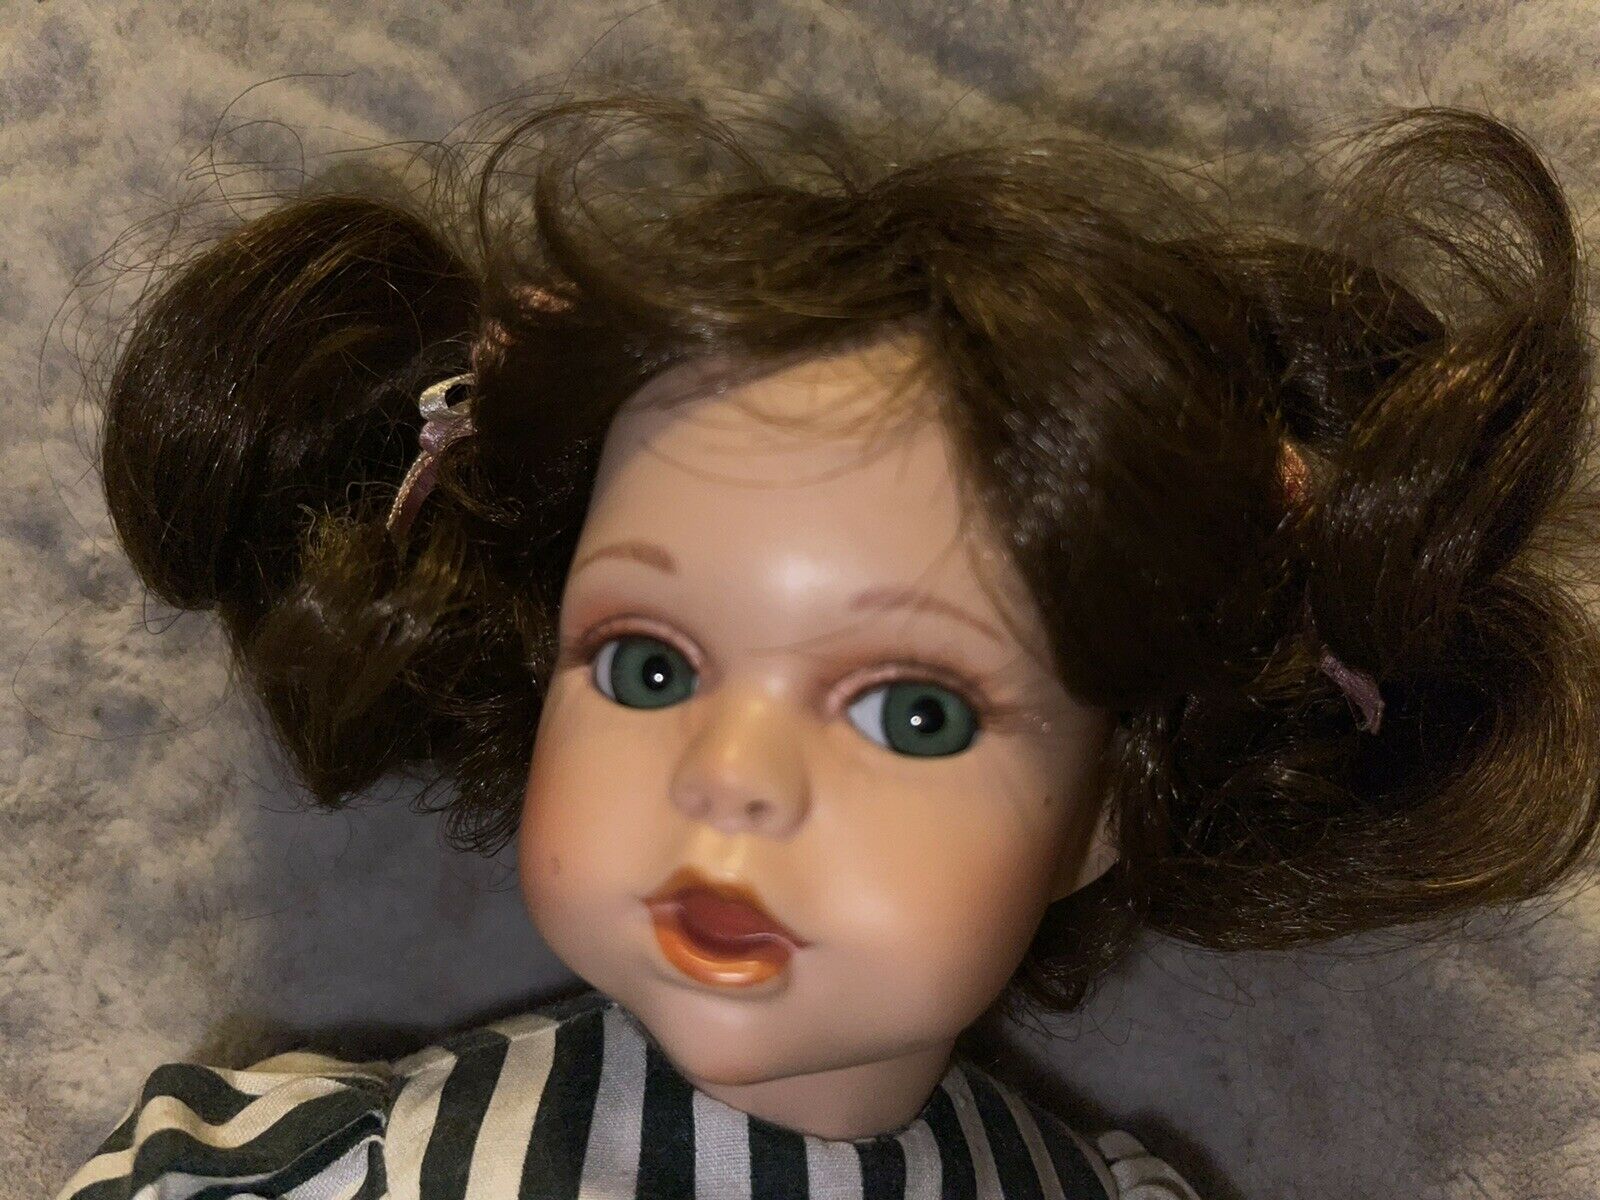 Tonya Lee “haunted" Looking Doll From Pennhurst State School Pa